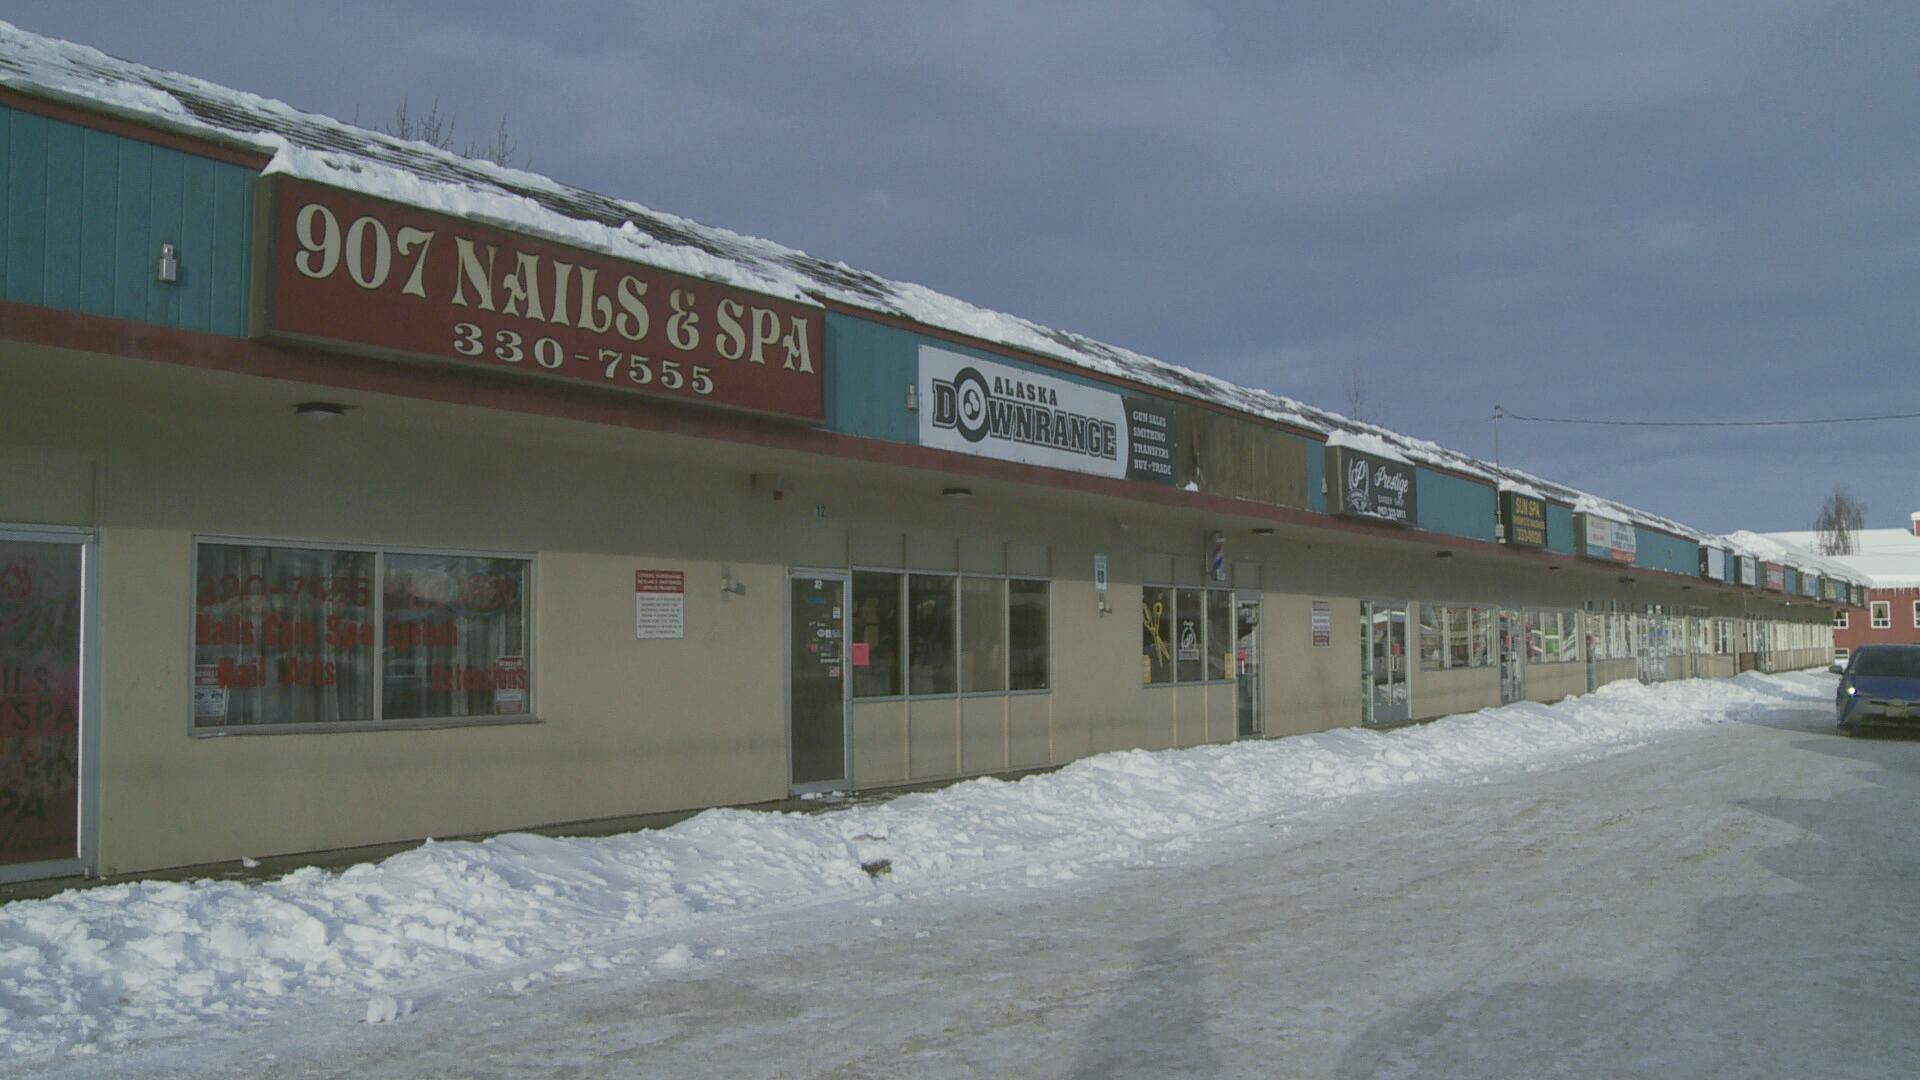 City Building Officials close Muldoon strip mall because of snow load concerns